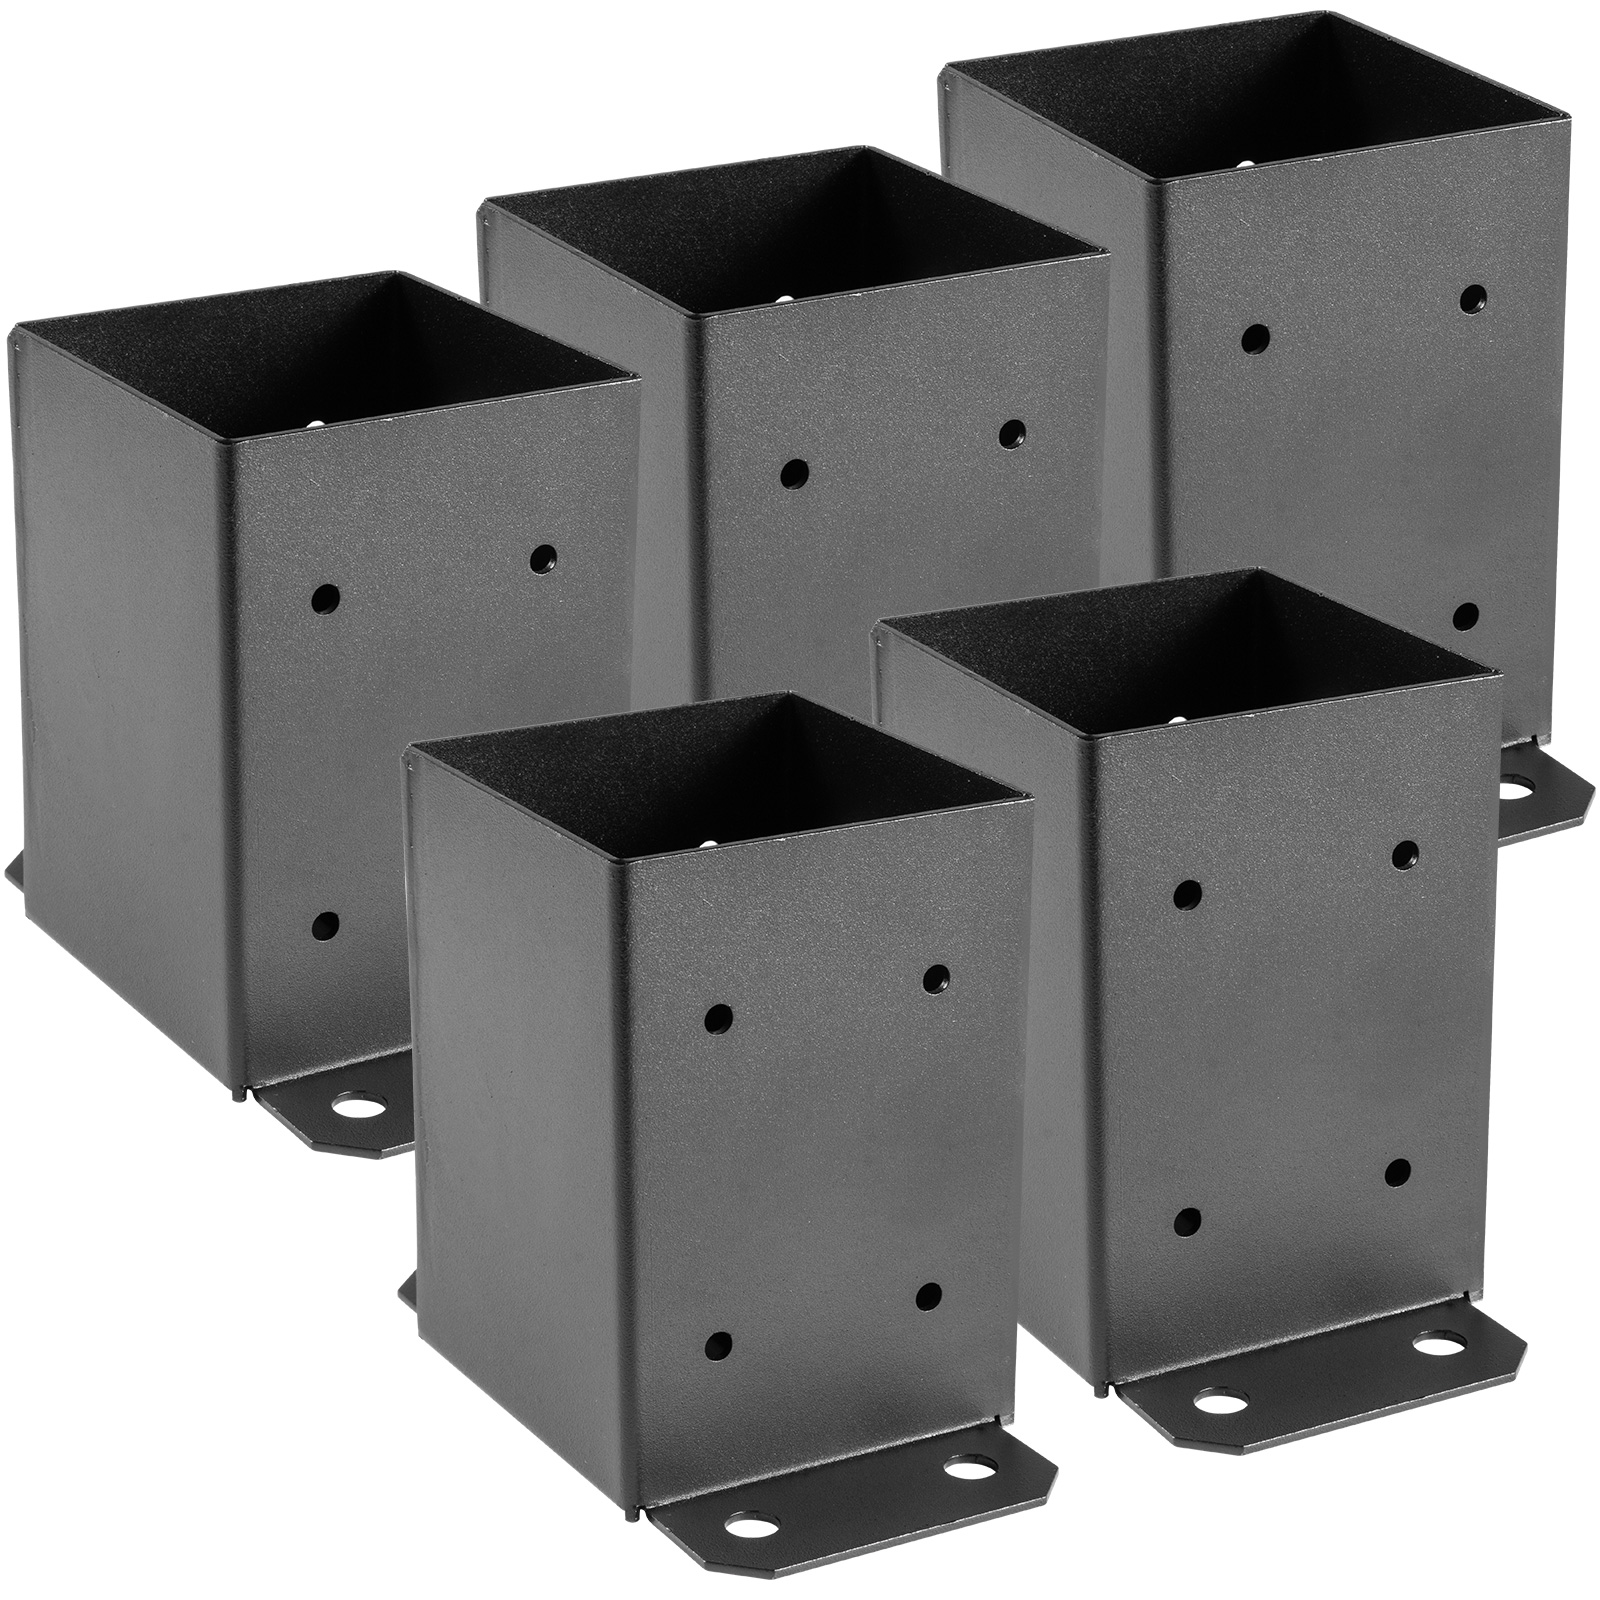 SPACEEUP 4×4 Post Base 3 Pcs, Inner Size 3.6x3.6 Post Base Brackets, Heavy  Duty Powder-Coated Post Anchor Matte Black Wood Post Brackets for